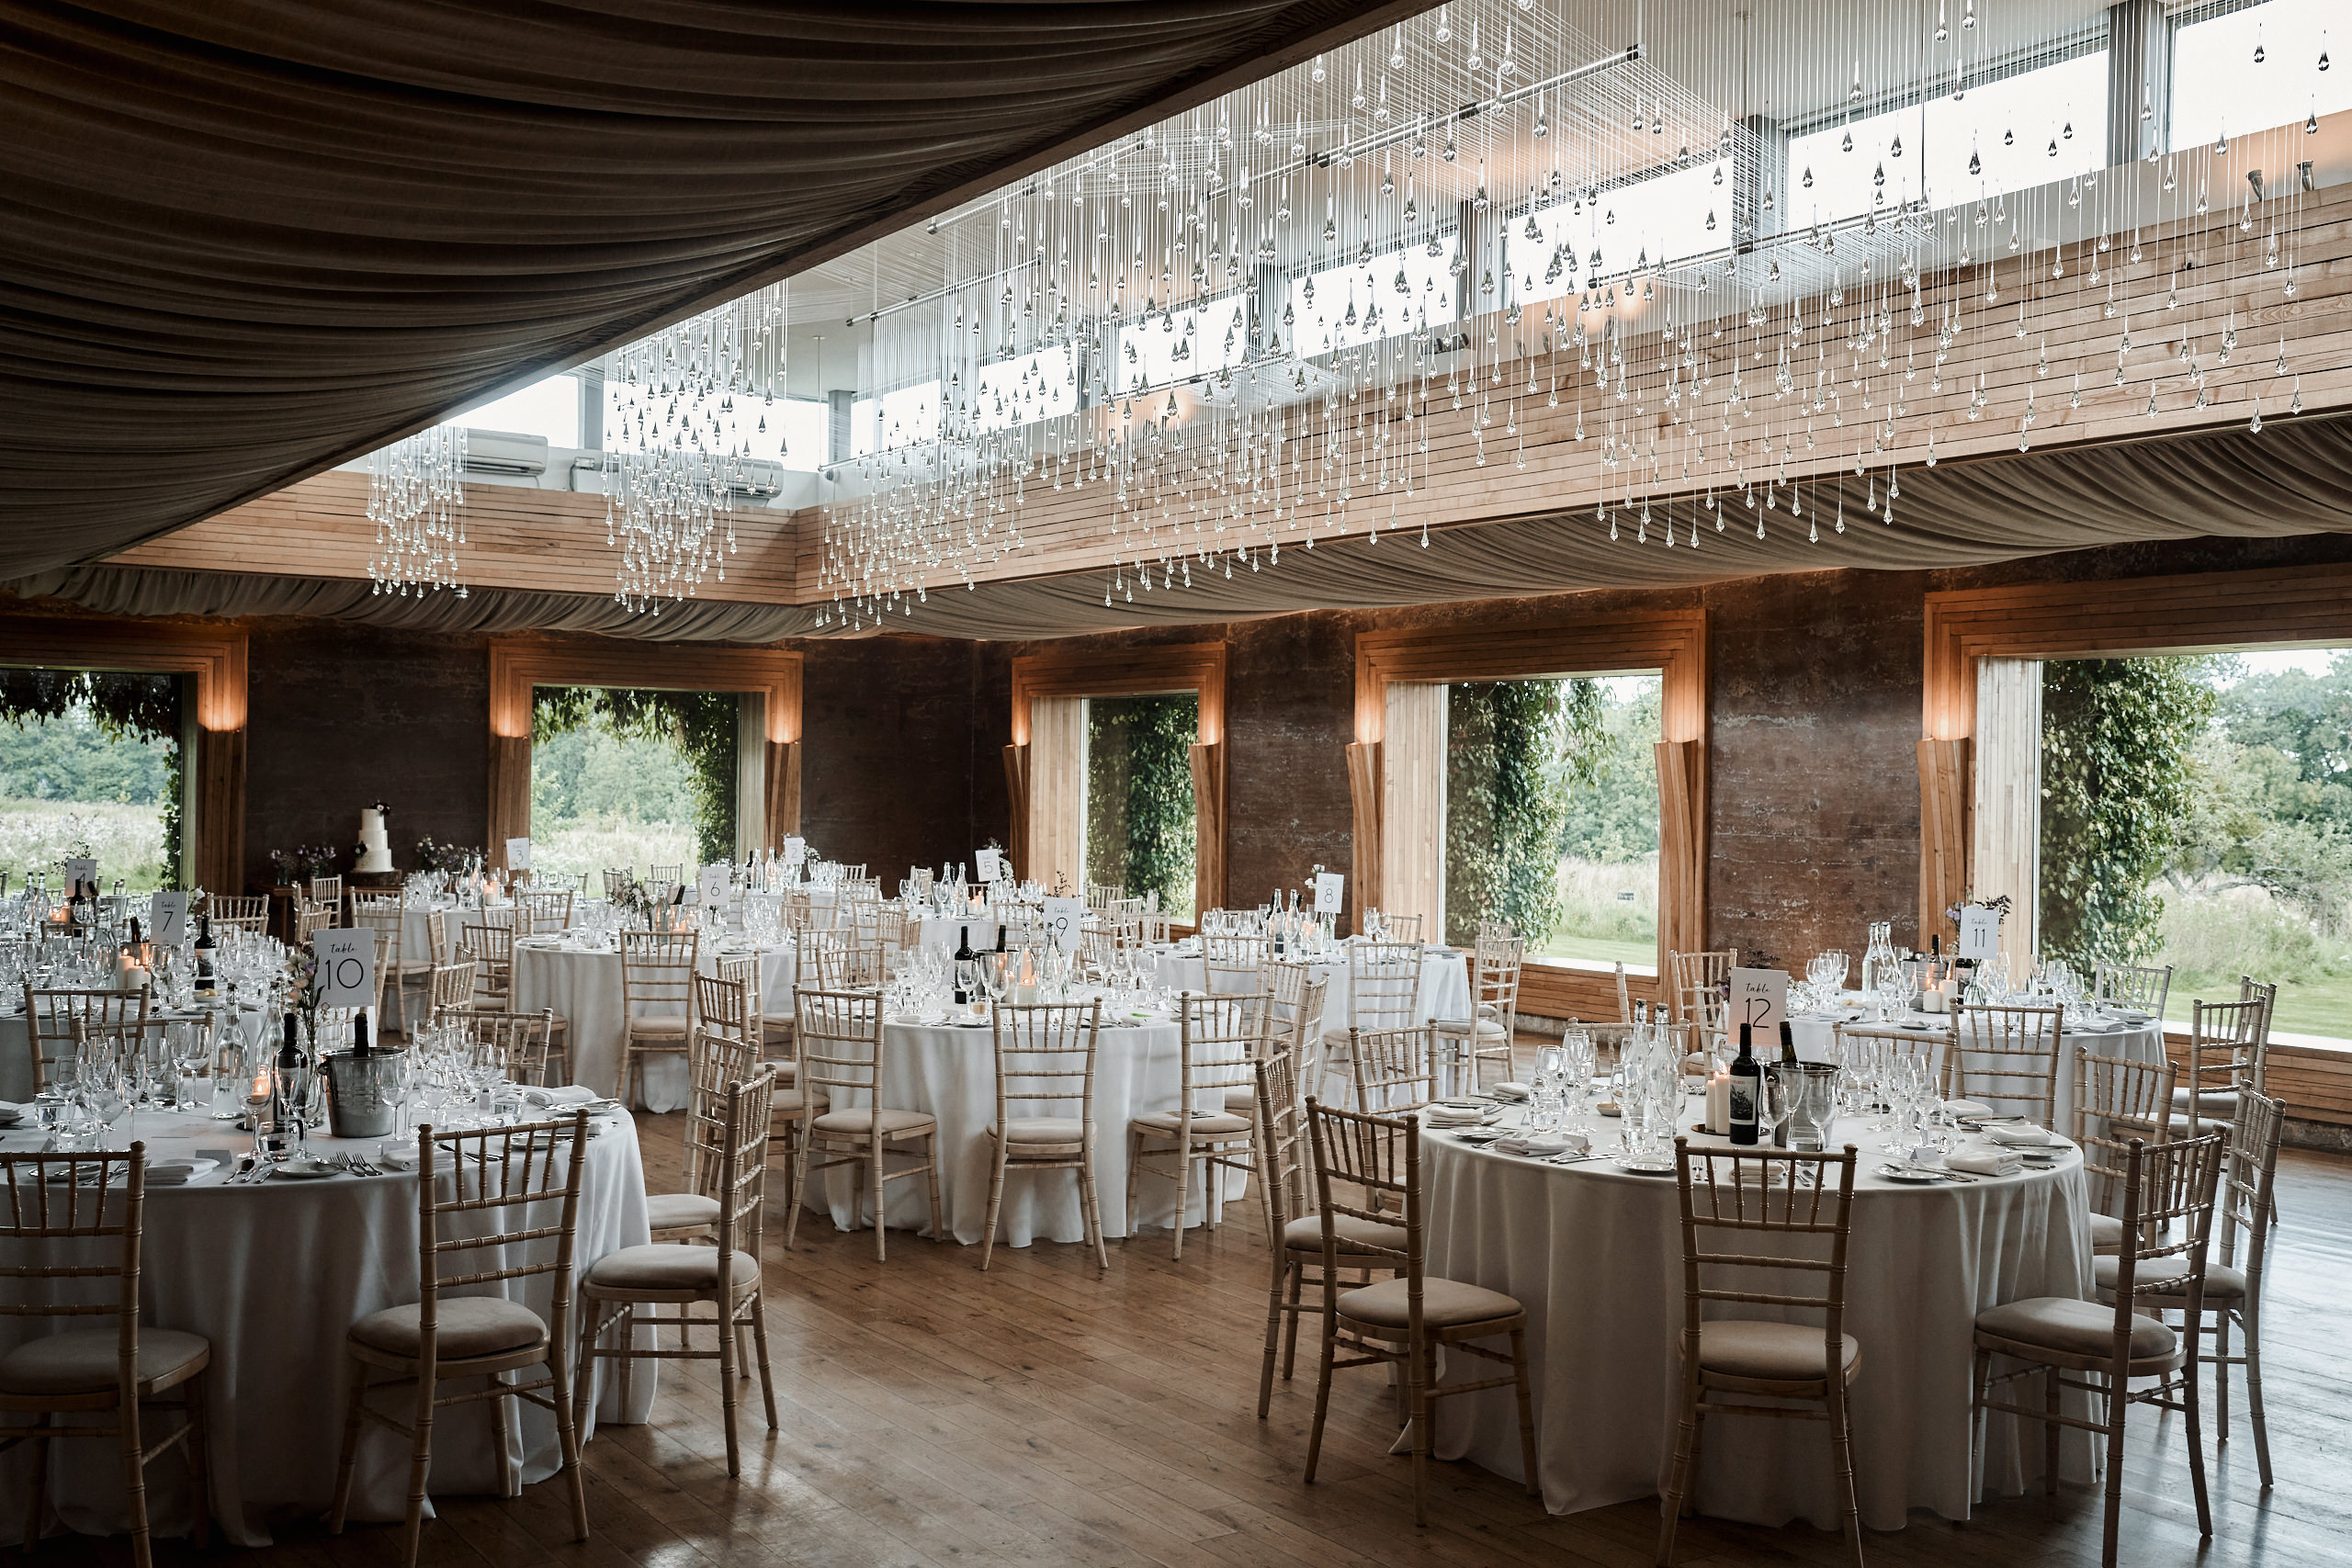 A big room with white tables and hanging lights for a wedding party.